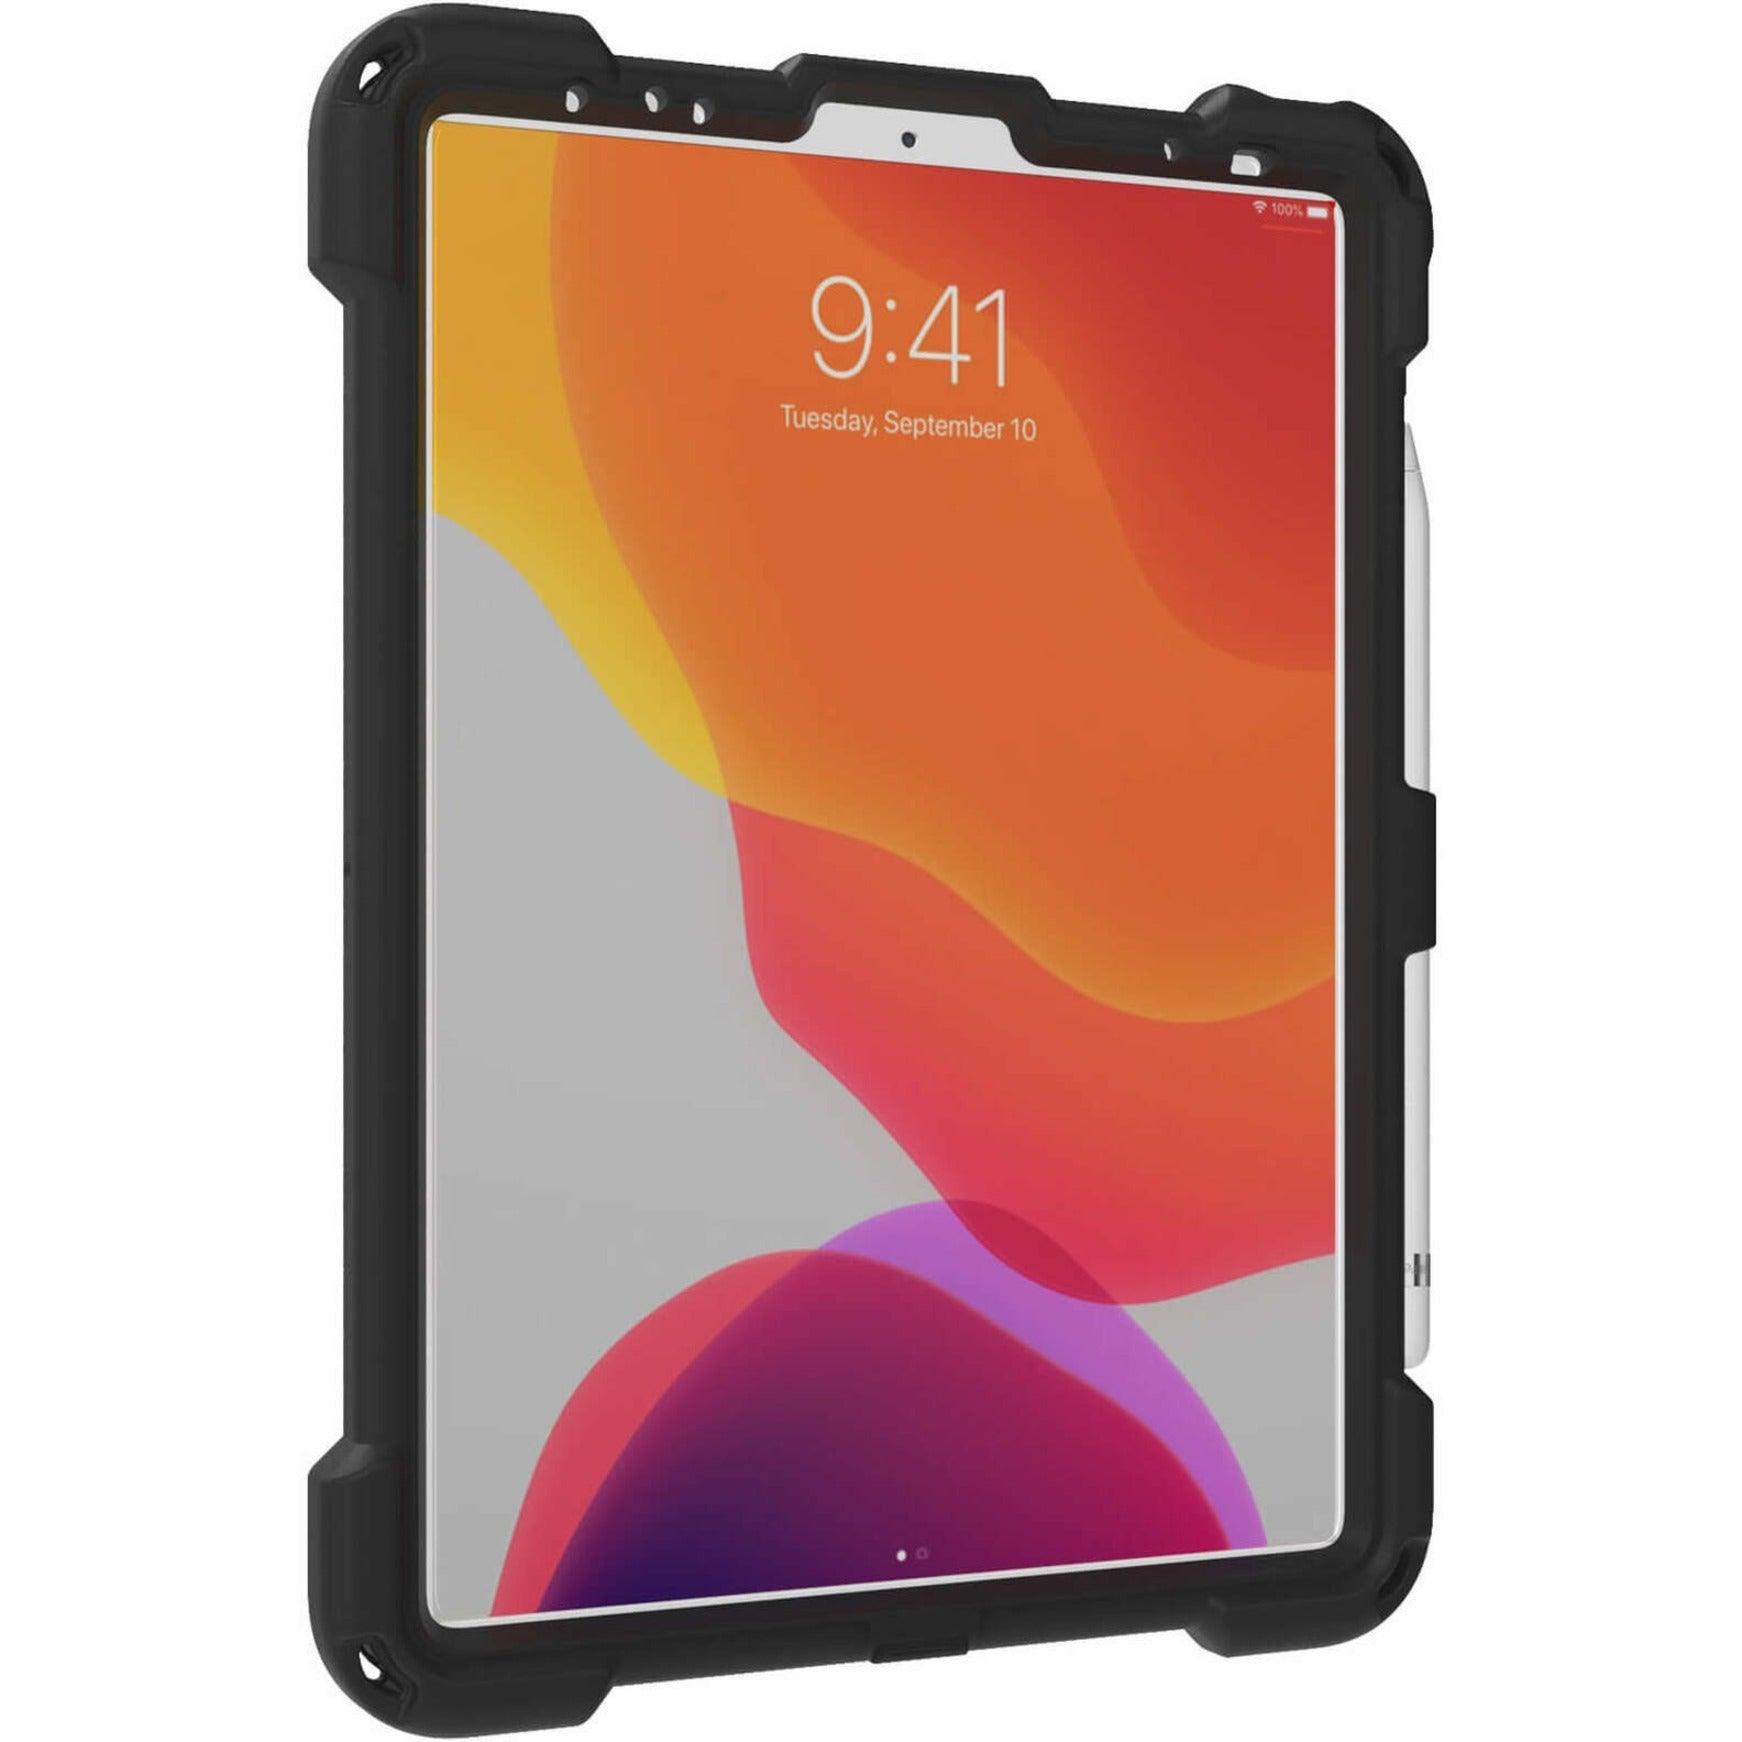 The Joy Factory CWA752MP aXtion Bold MP for iPad Pro 11-inch 3rd | 2nd Gen | iPad Air 4th Gen (Black), Shock Proof, Water Resistant, Hand Strap